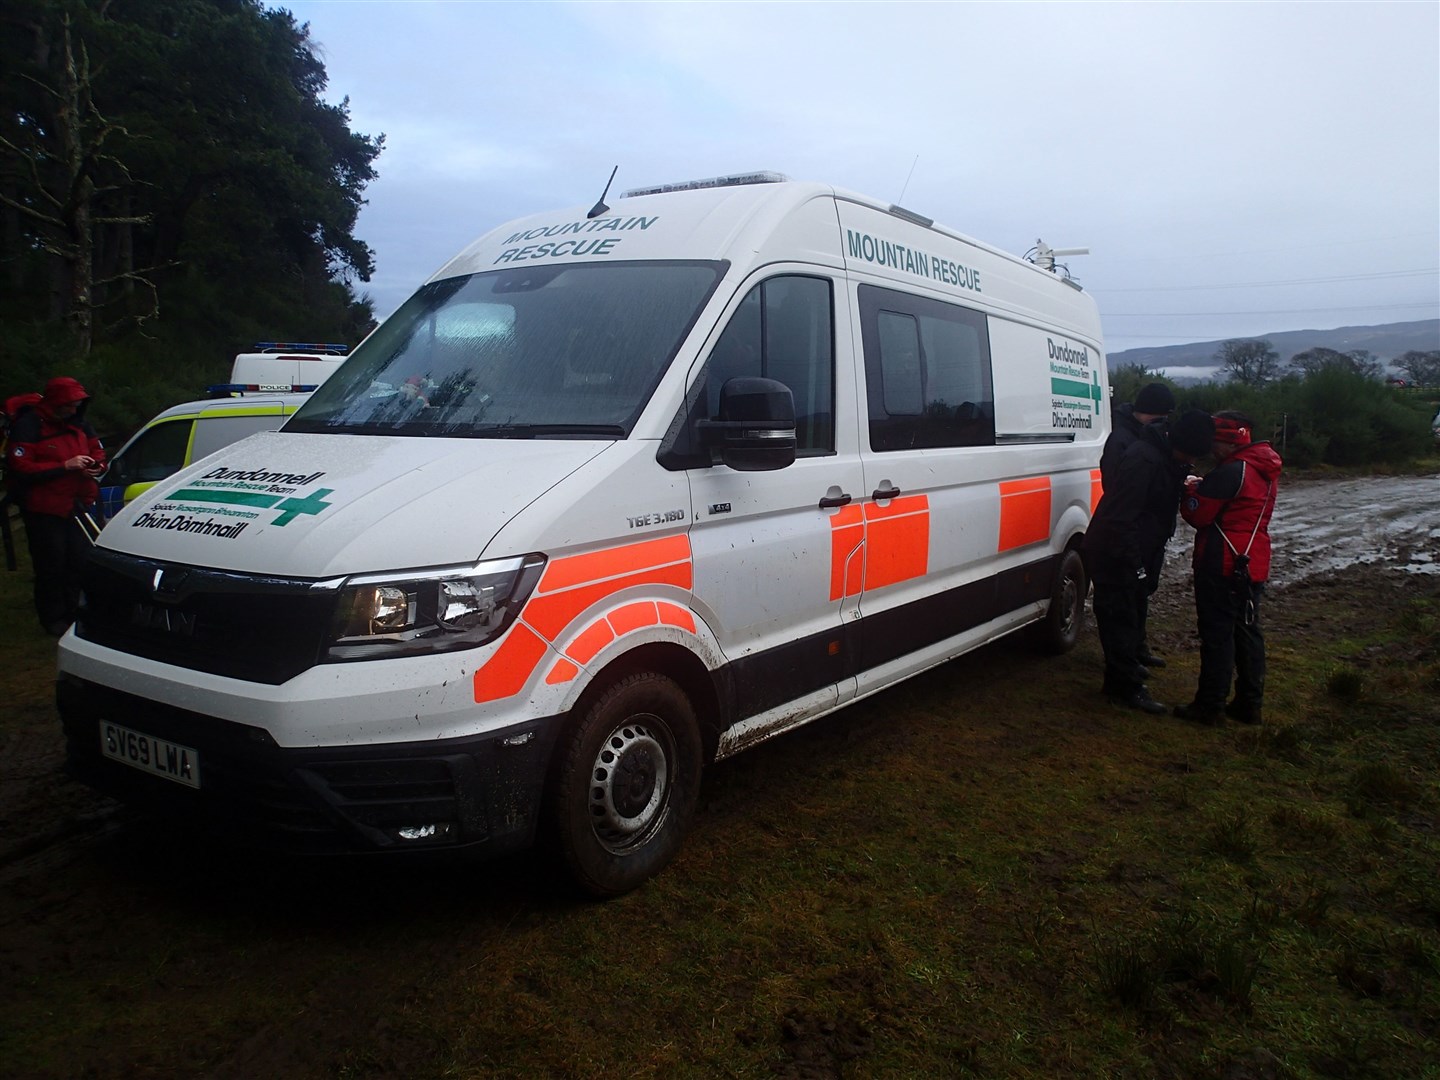 The new vehicle’s first outing was for a callout to search for a missing person at Fanellan, near Beauly.